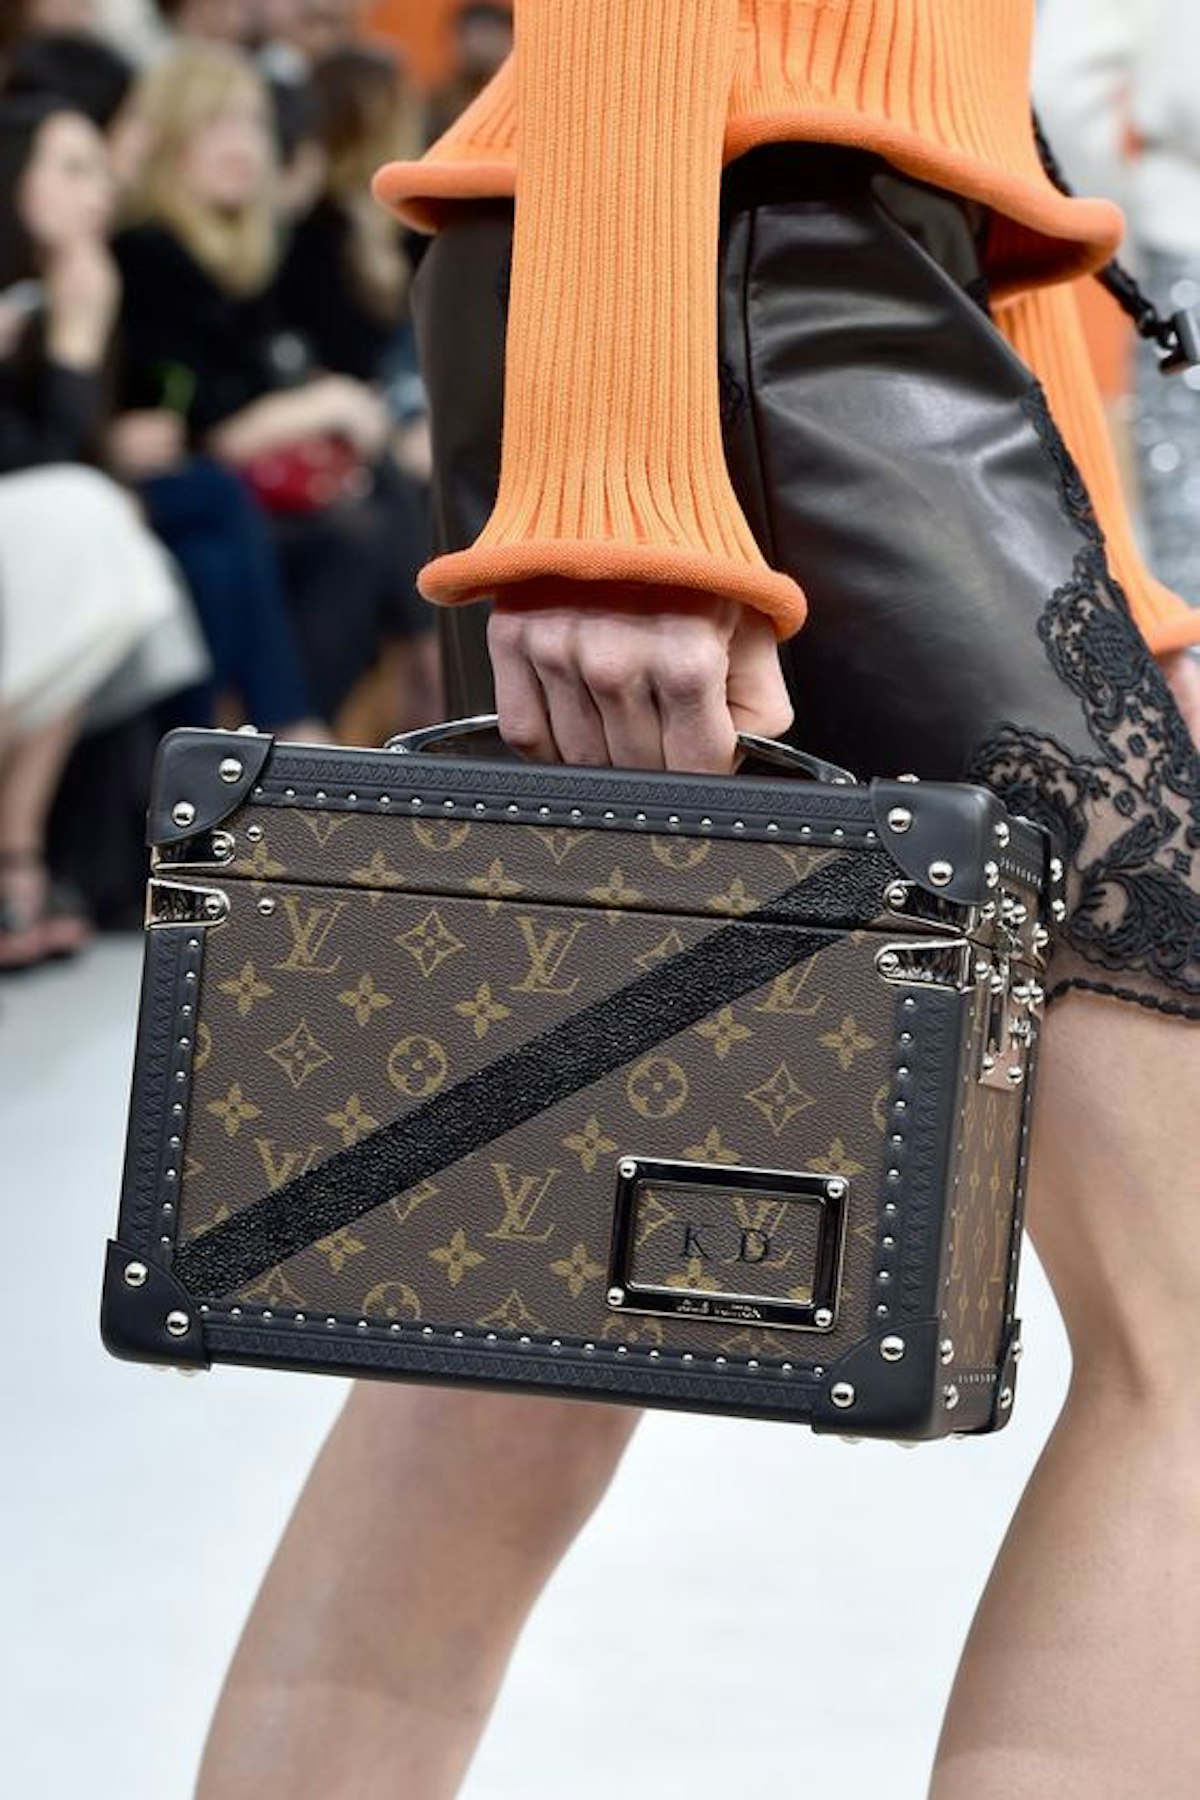 Then and now: The history behind Louis Vuitton's iconic monogram